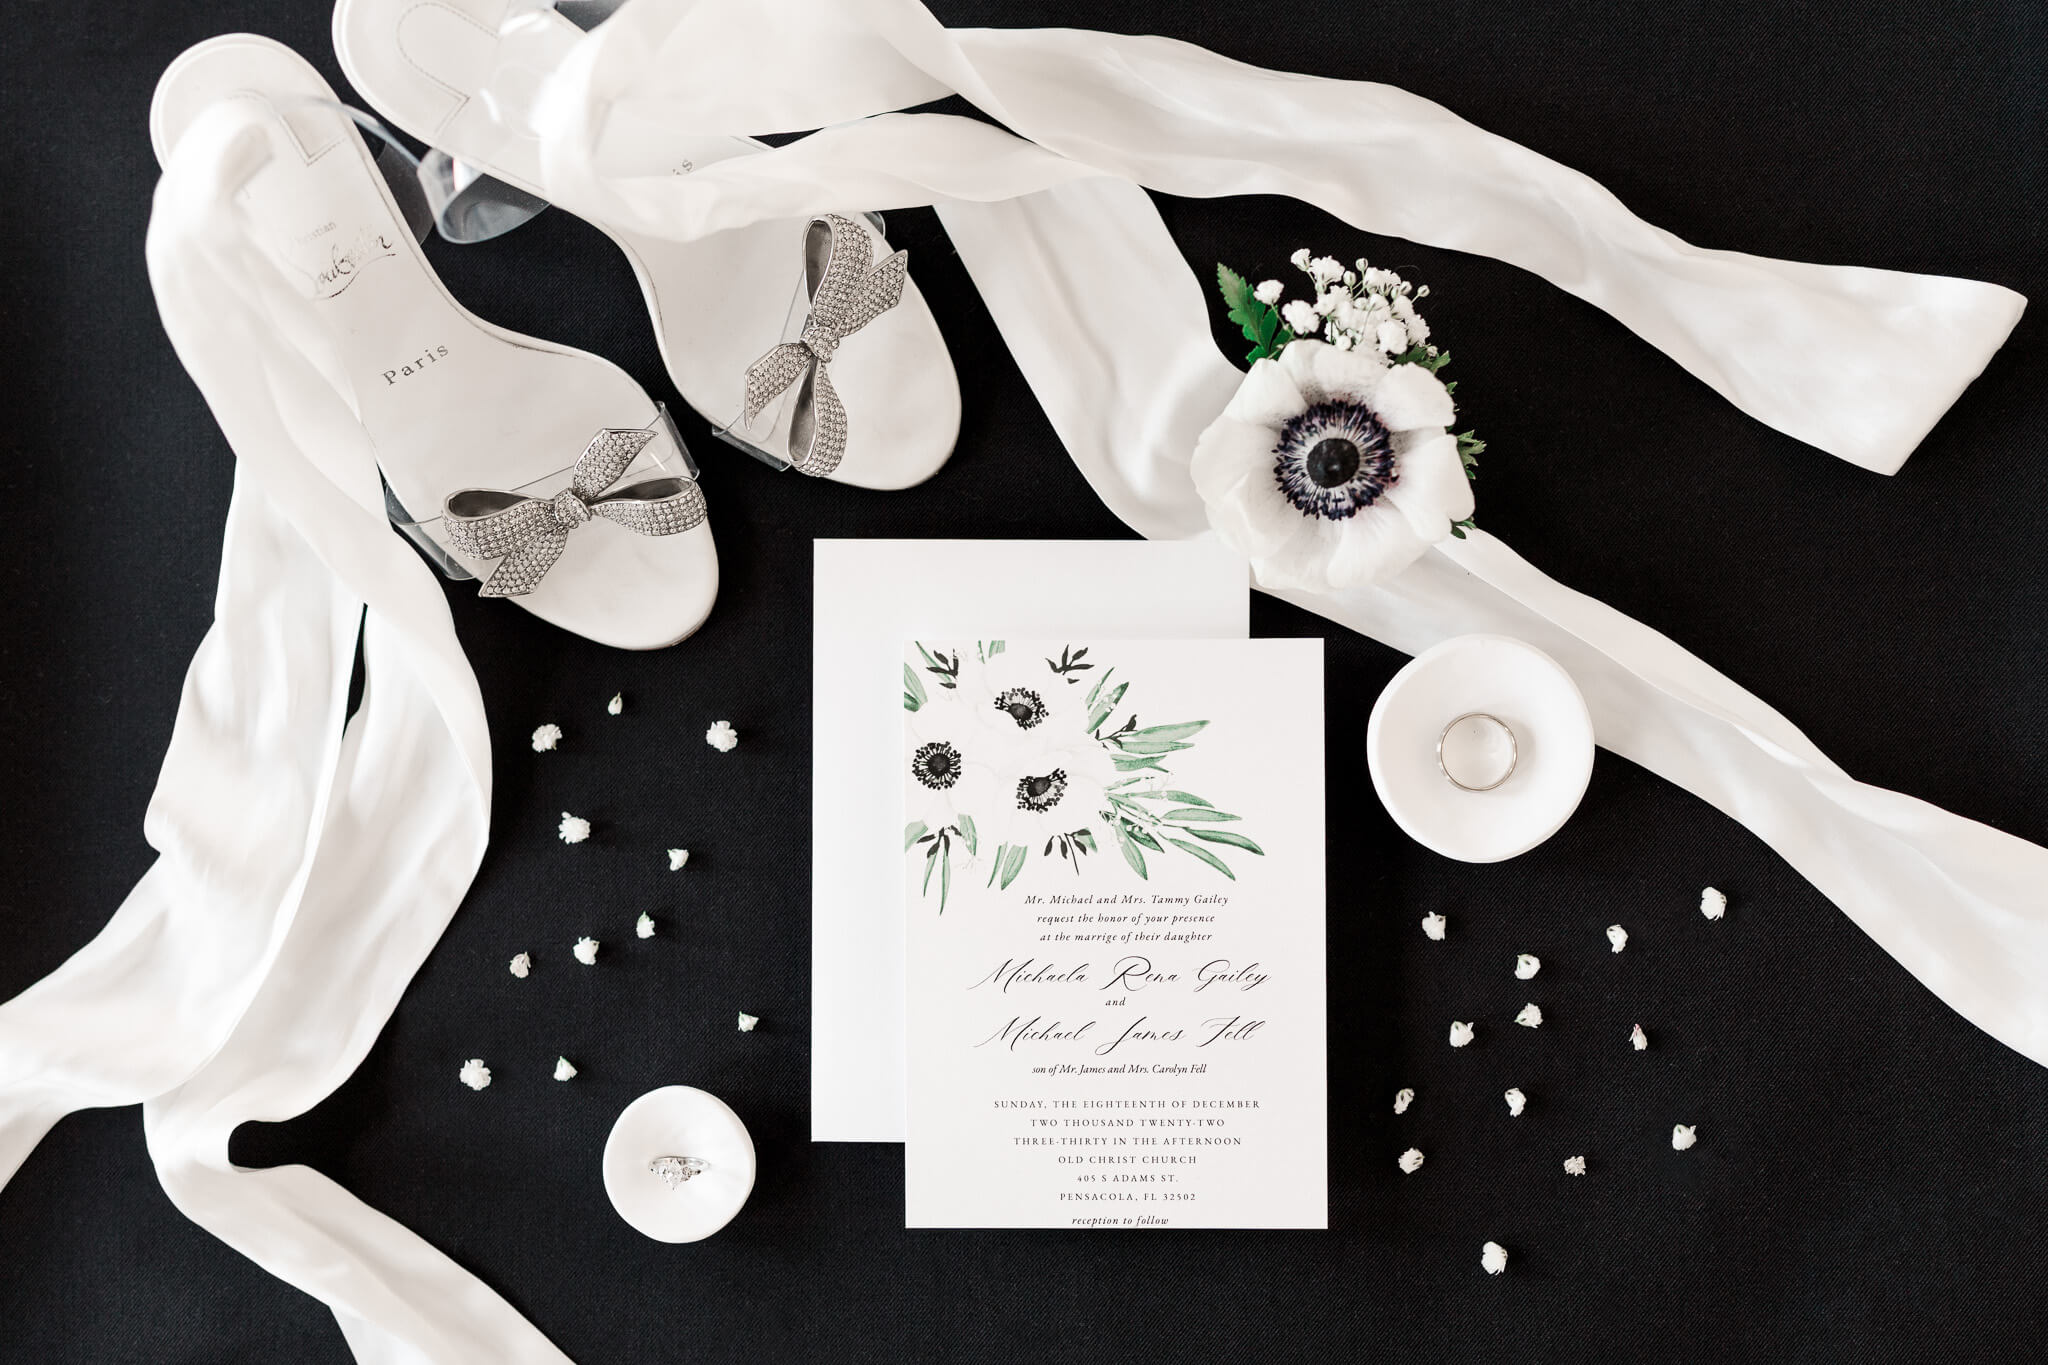 Black and white wedding day details with anemone flowers and Christian Louboutin wedding shoes